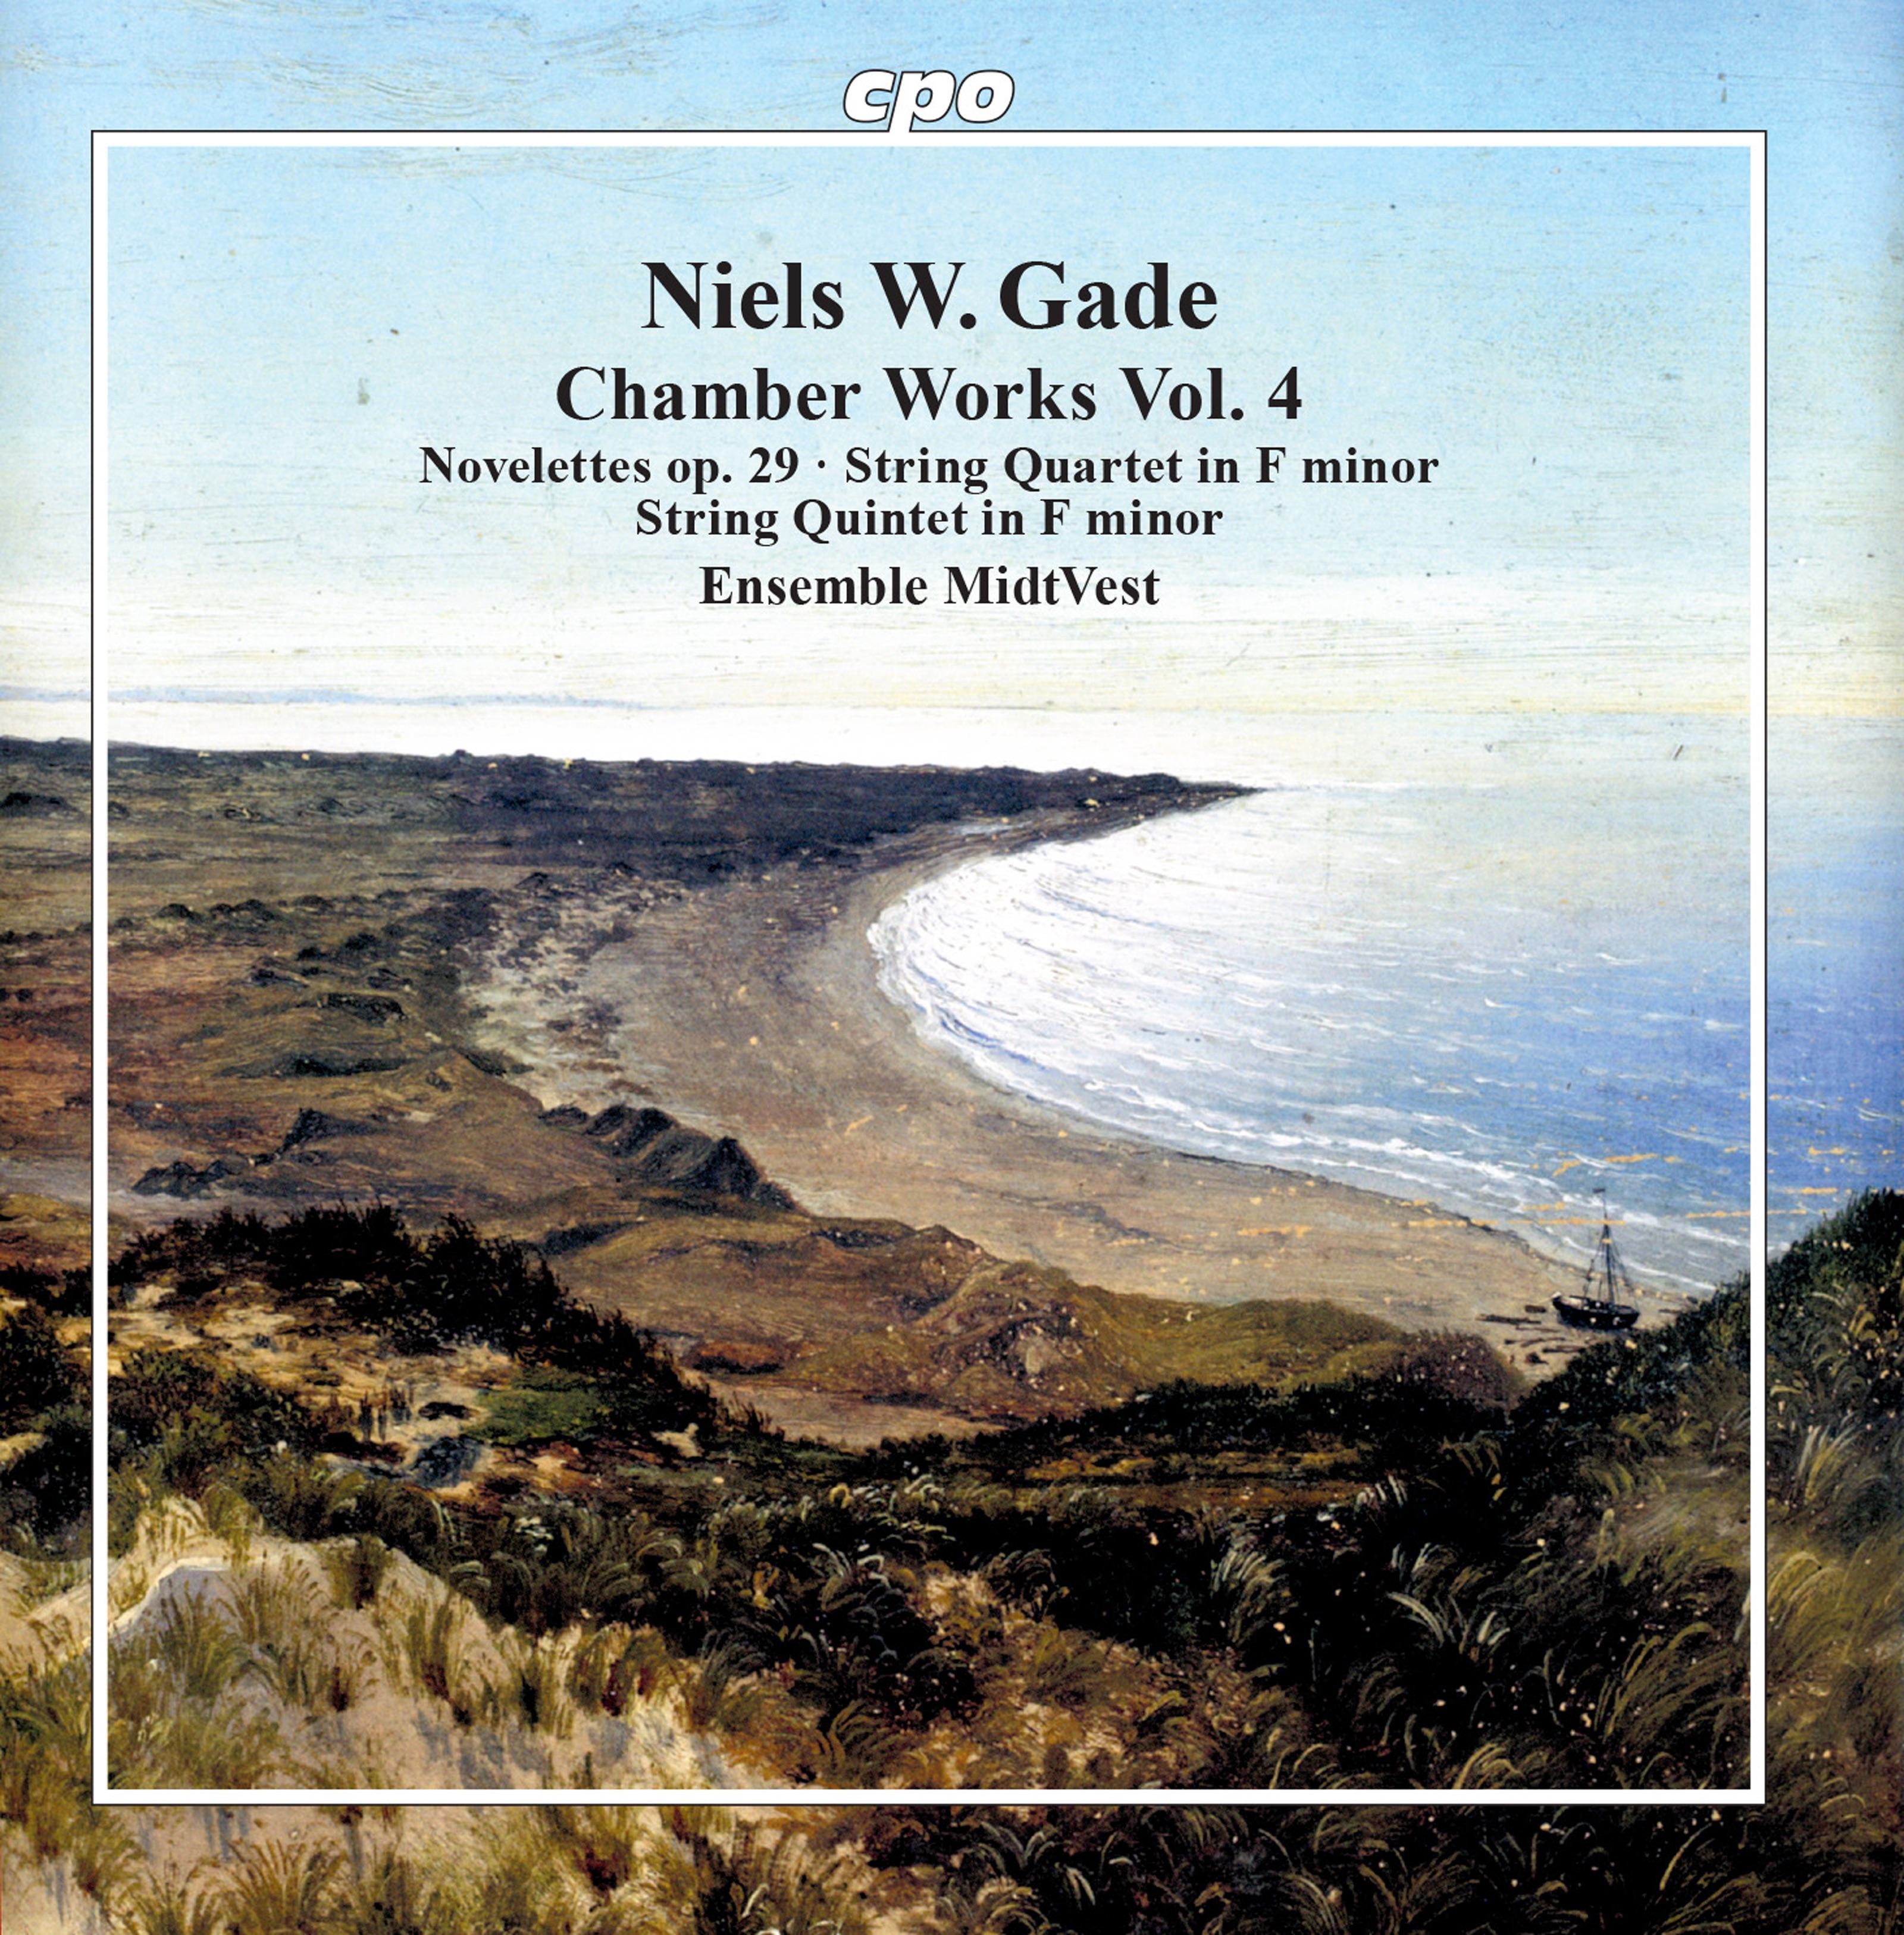 Magical Journey: Niels Gade - Chamber Works, Vol. 4 (Ensemble MidtVest)